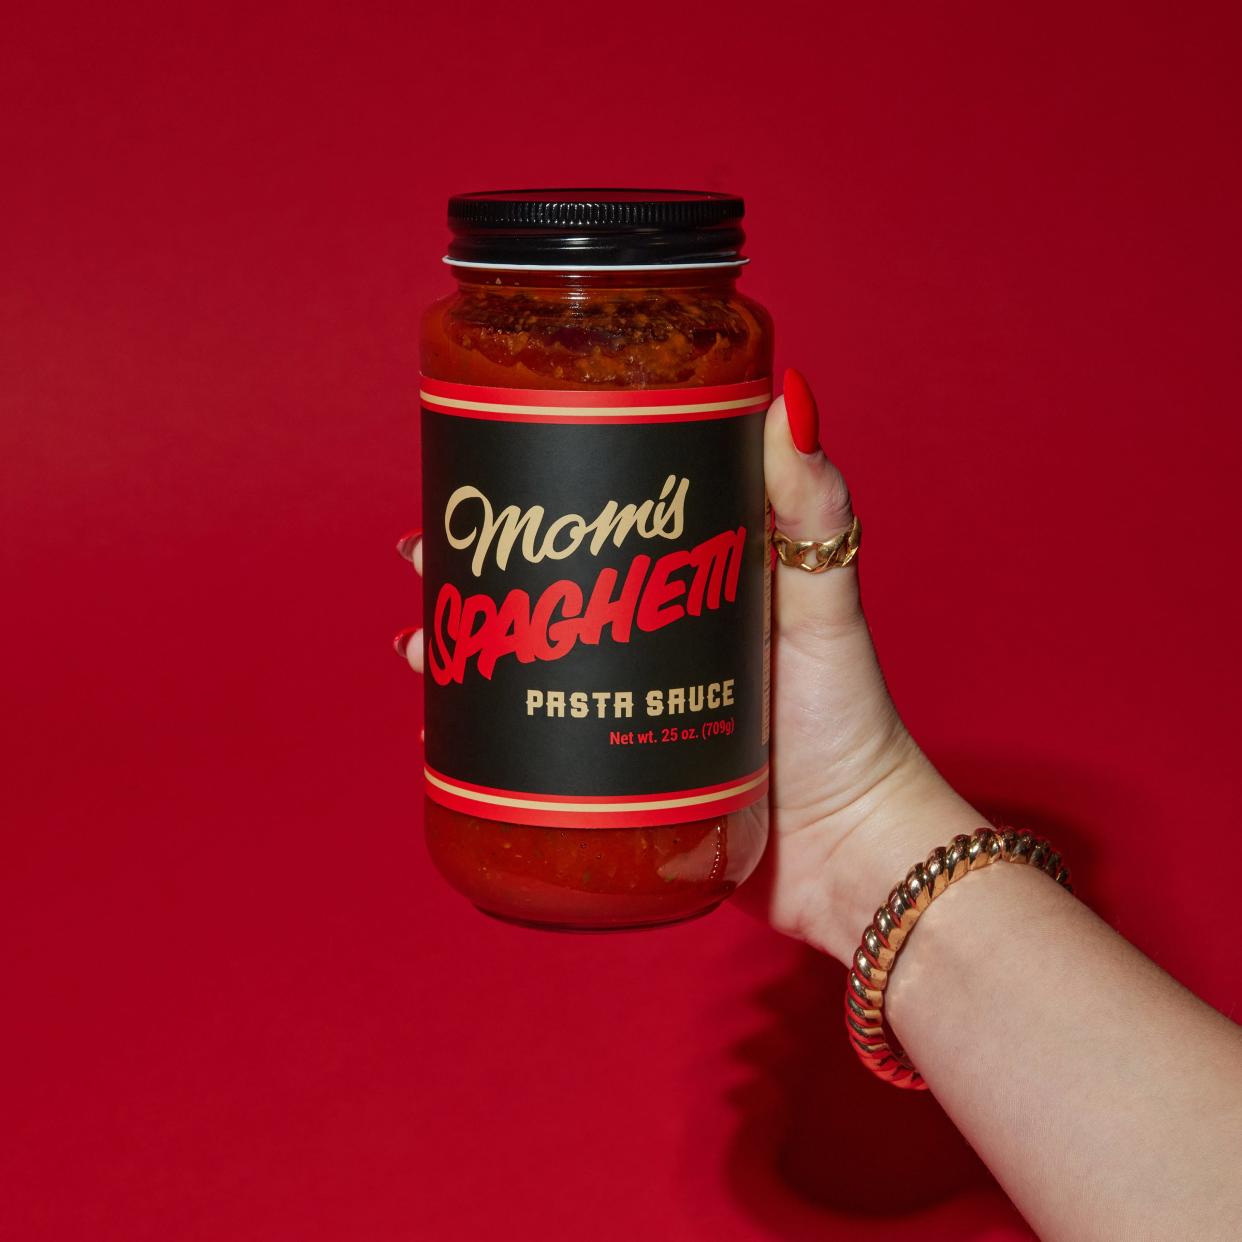 Mom's Spaghetti Pasta Sauce just launched and sold out quickly.